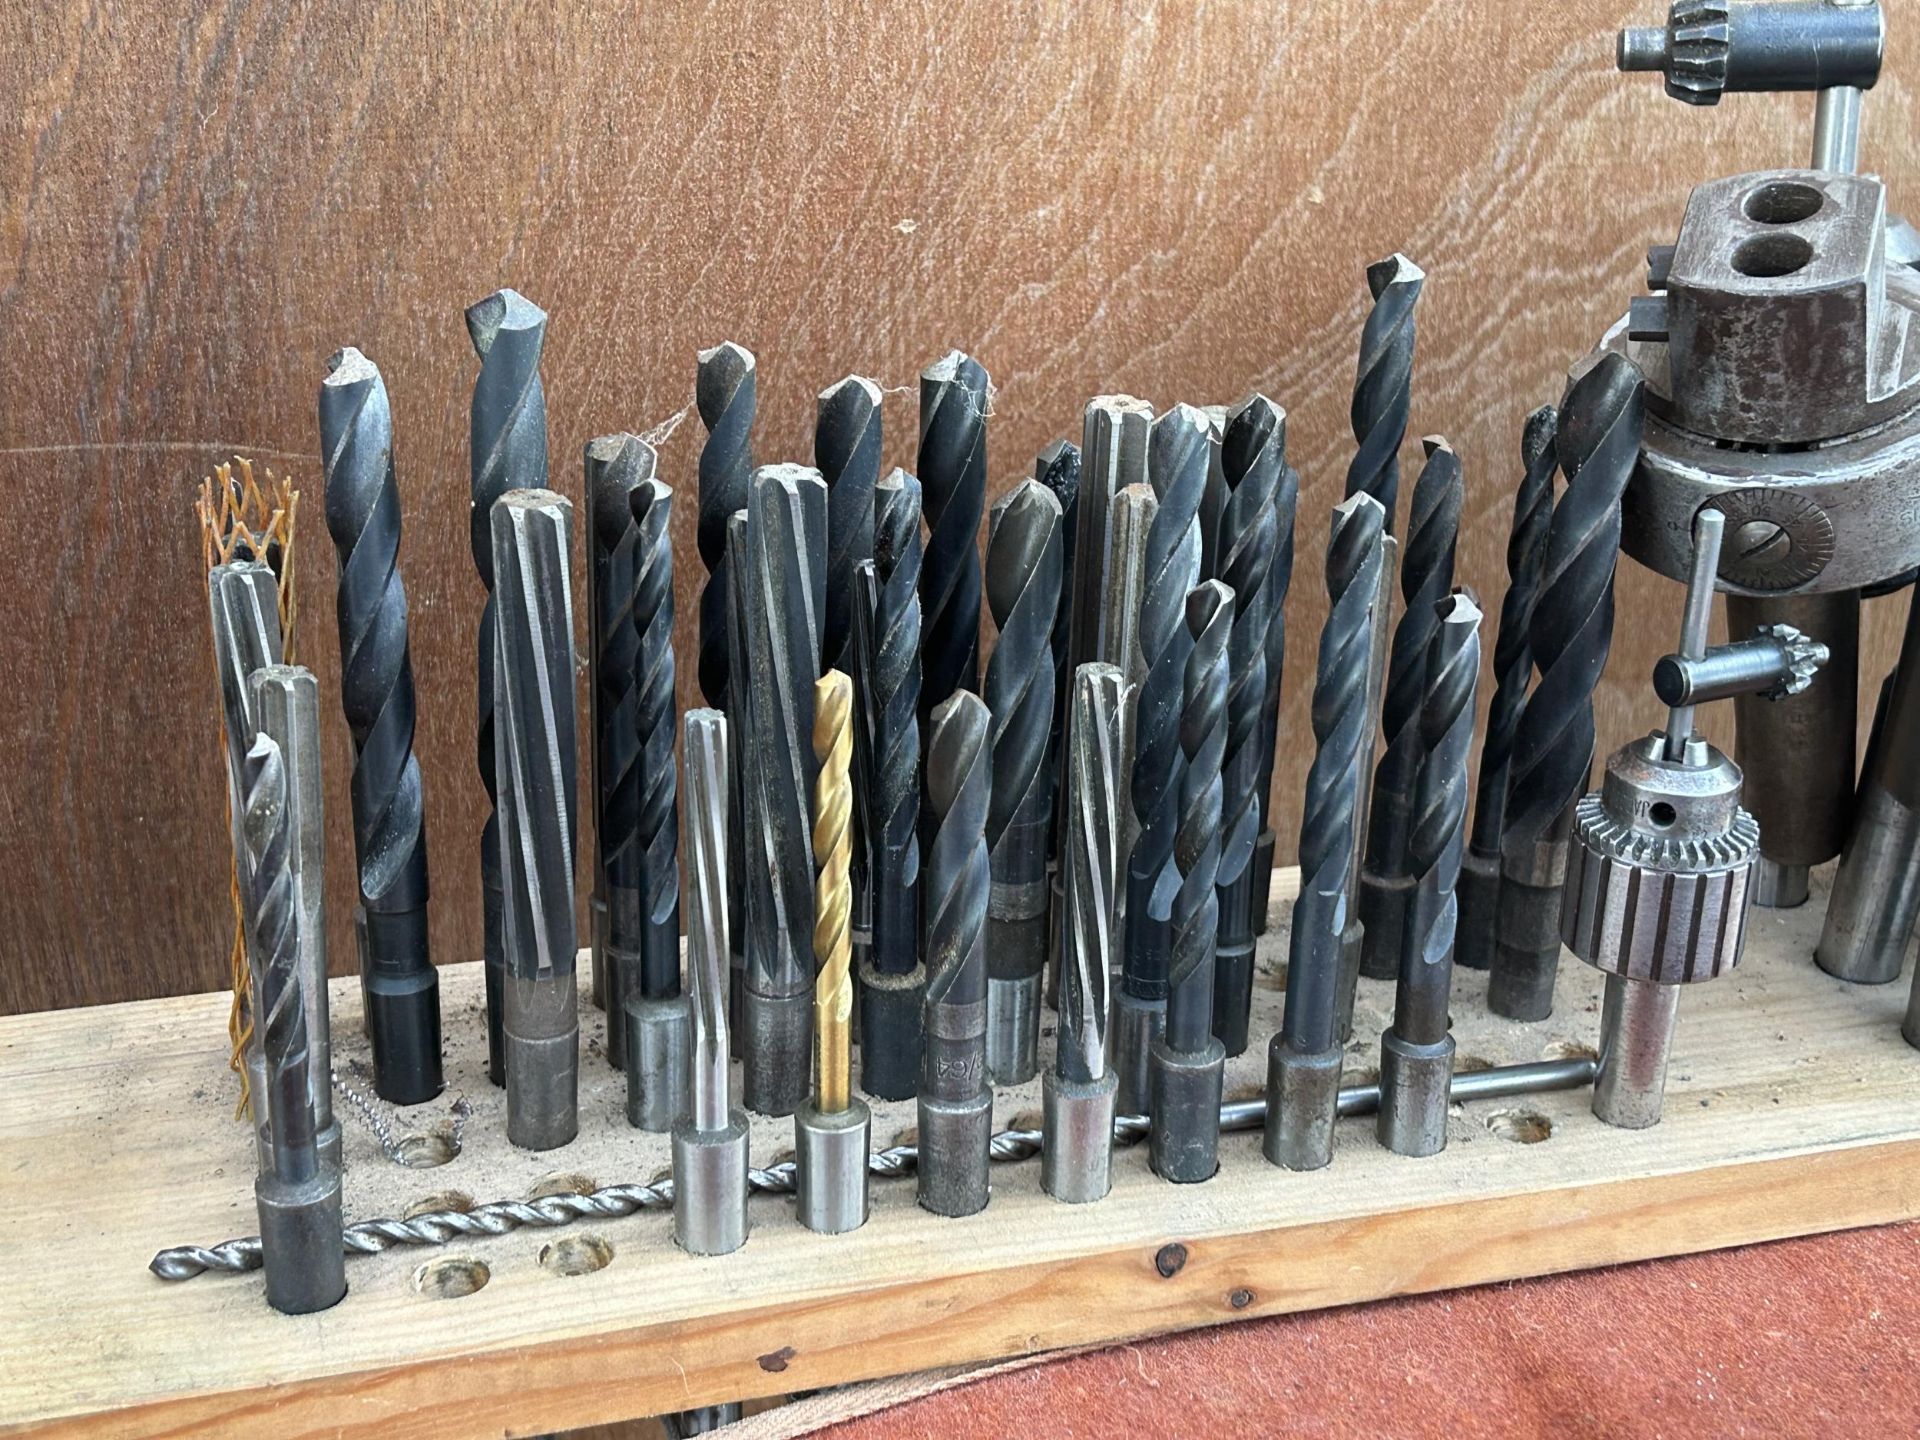 A LARGE ASSORTMENT OF DRILL BITS AND DRILL CHUCKS - Image 2 of 3